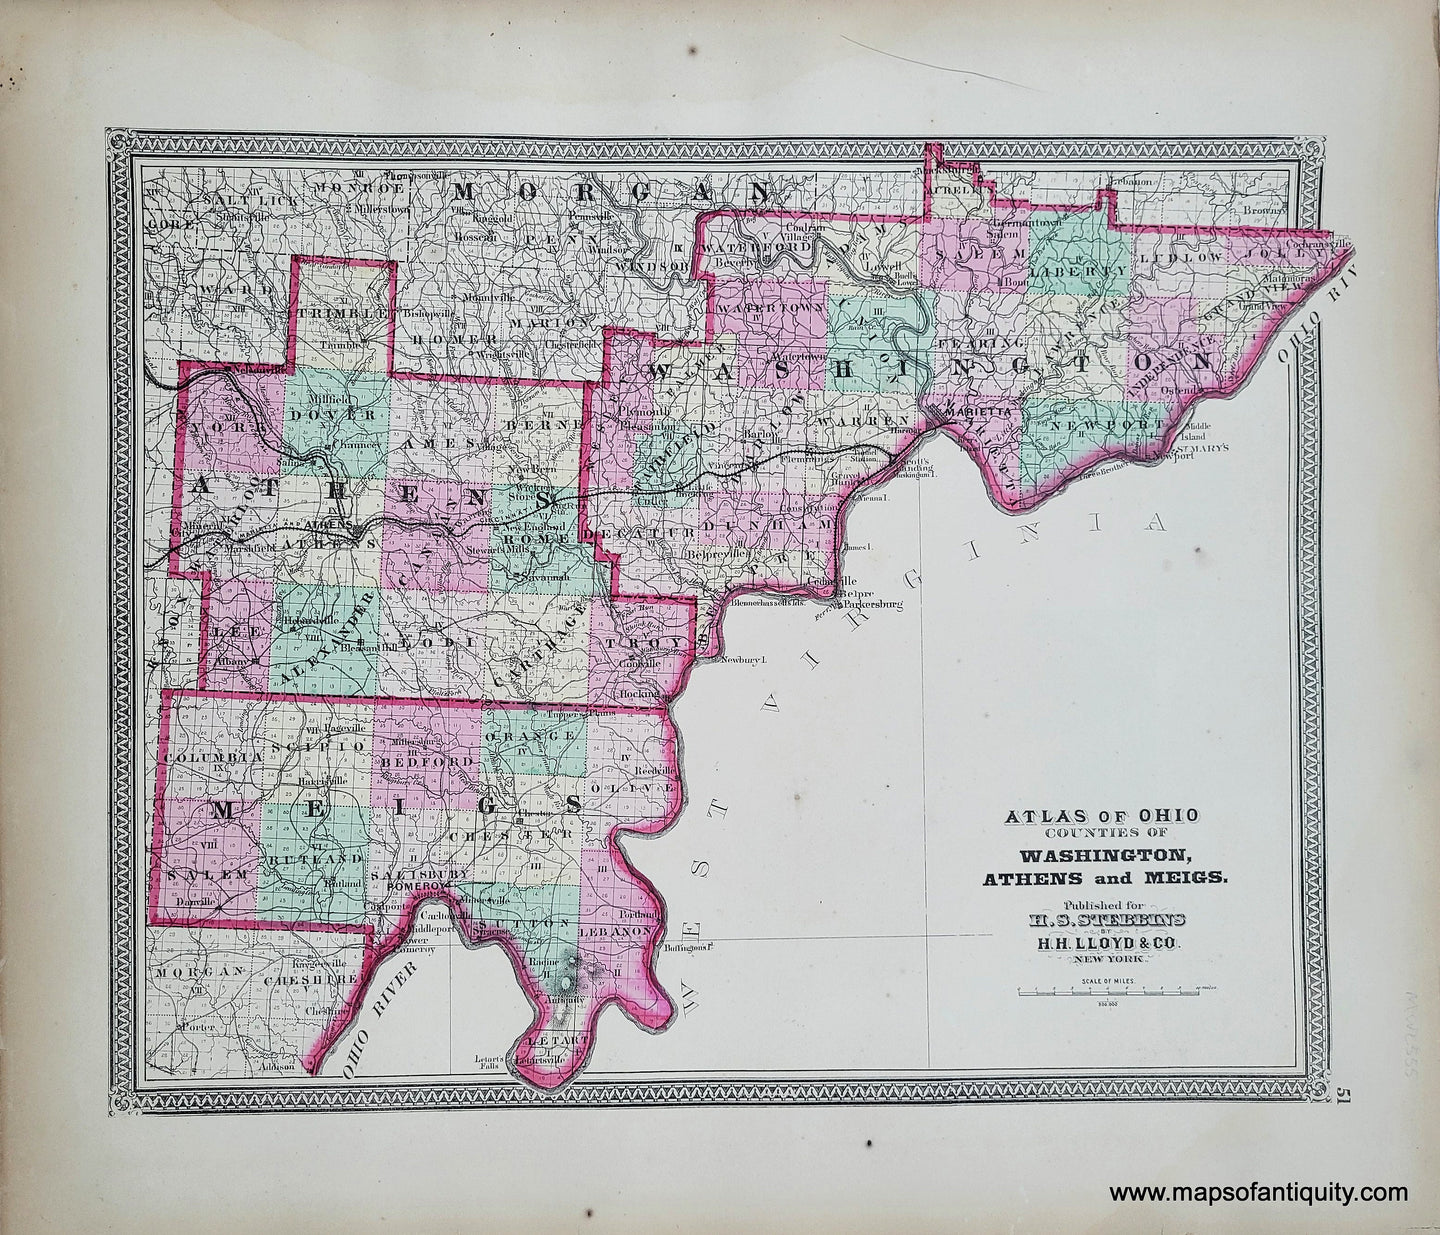 Genuine-Antique-Hand-colored-Map-Atlas-of-Ohio-Counties-of-Washington-Athens-and-Meigs-1868-Stebbins-Lloyd-Maps-Of-Antiquity